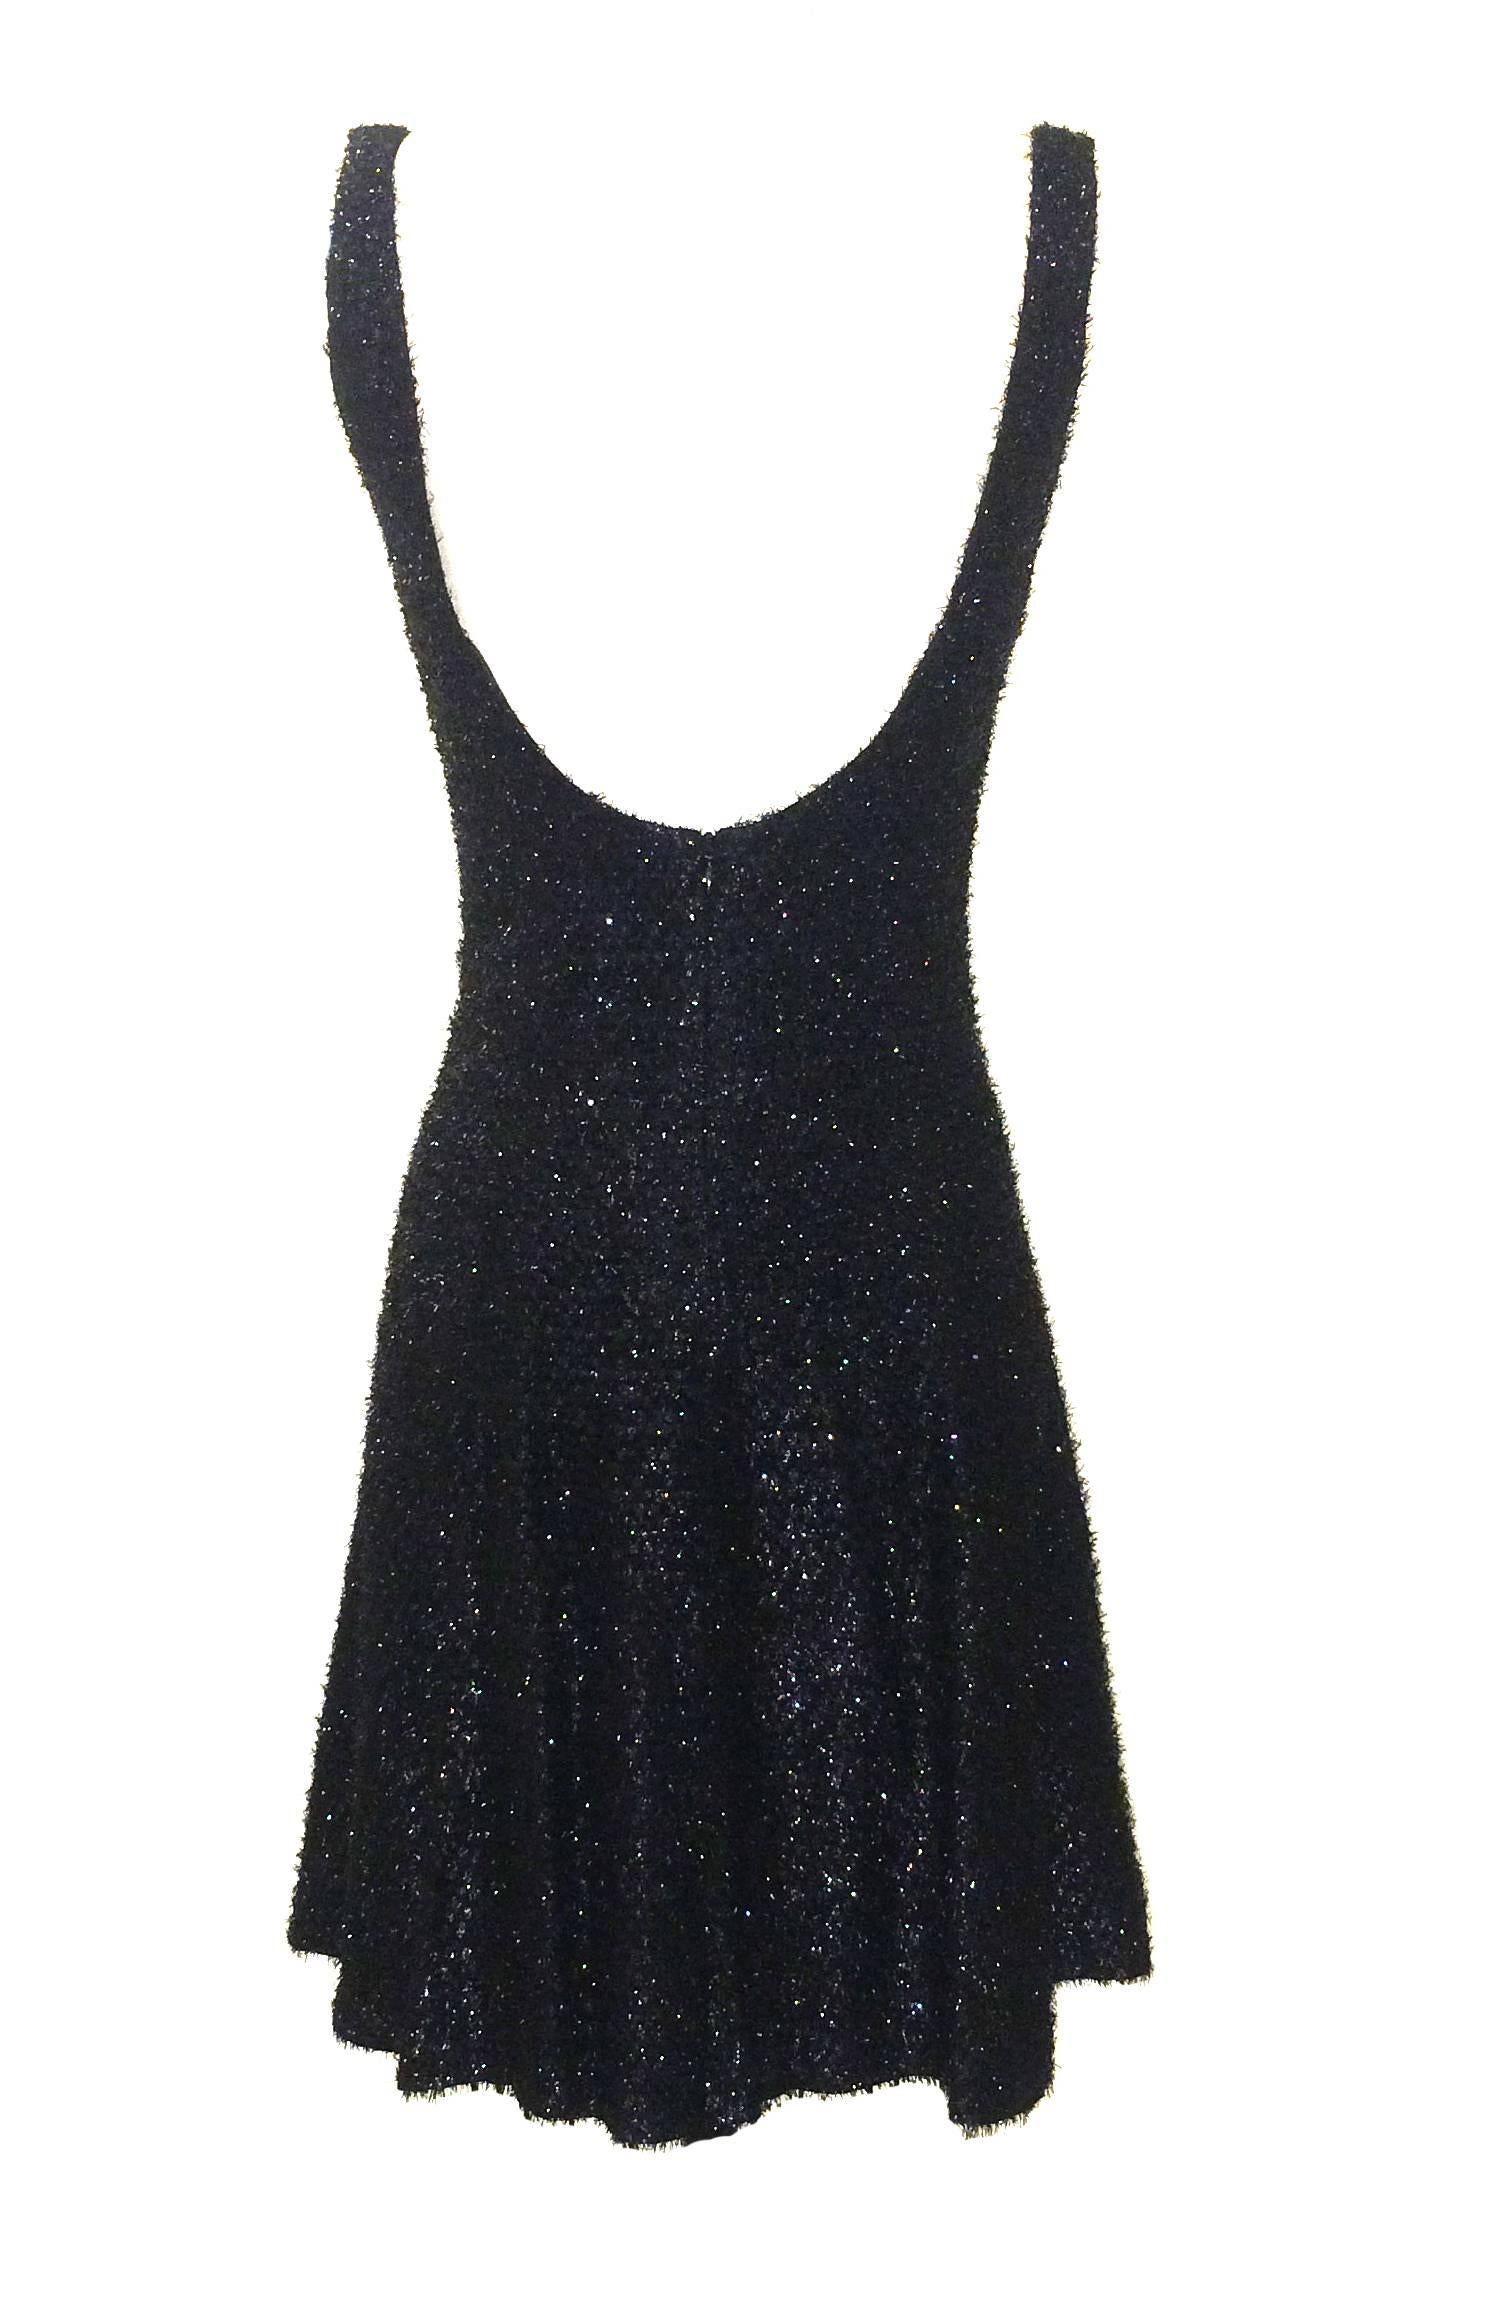 Stephen Sprouse 1980's black backless skater-shaped dress in a honeycombed metallic fringe fabric. Back zip.

80% rayon, 20% polyester.
Fully lined in 100% acetate.

Made in Korea.

Size 8.
Bust 34